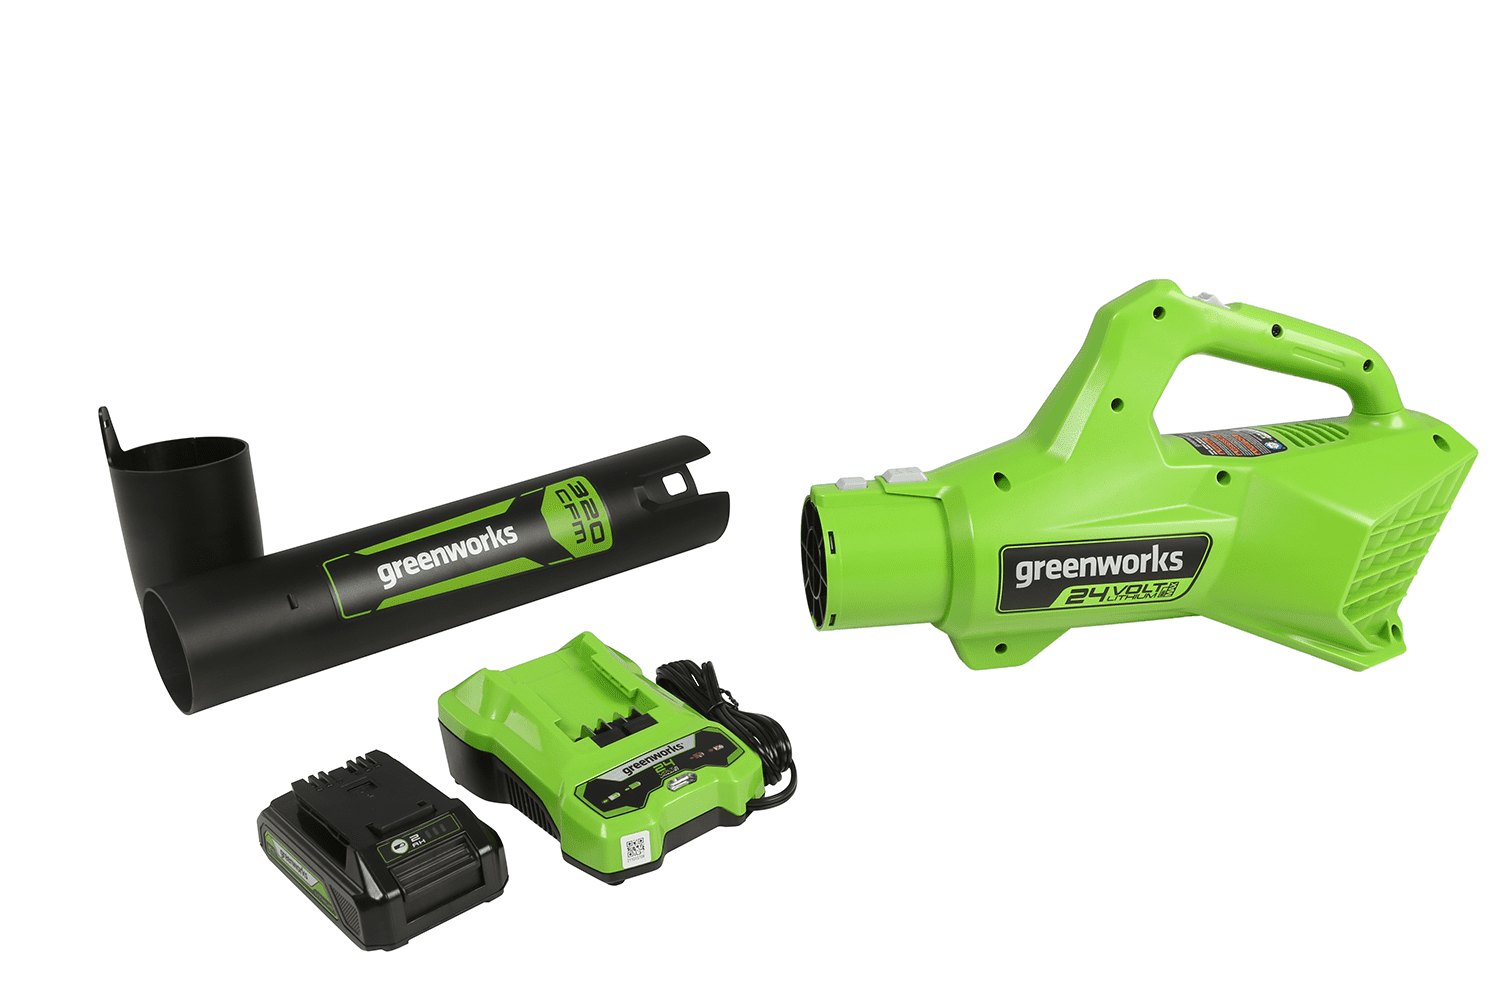 Greenworks 24V Cordless Axial Blower (90 MPH / 320 CFM) ， 2Ah USB Battery and Charger